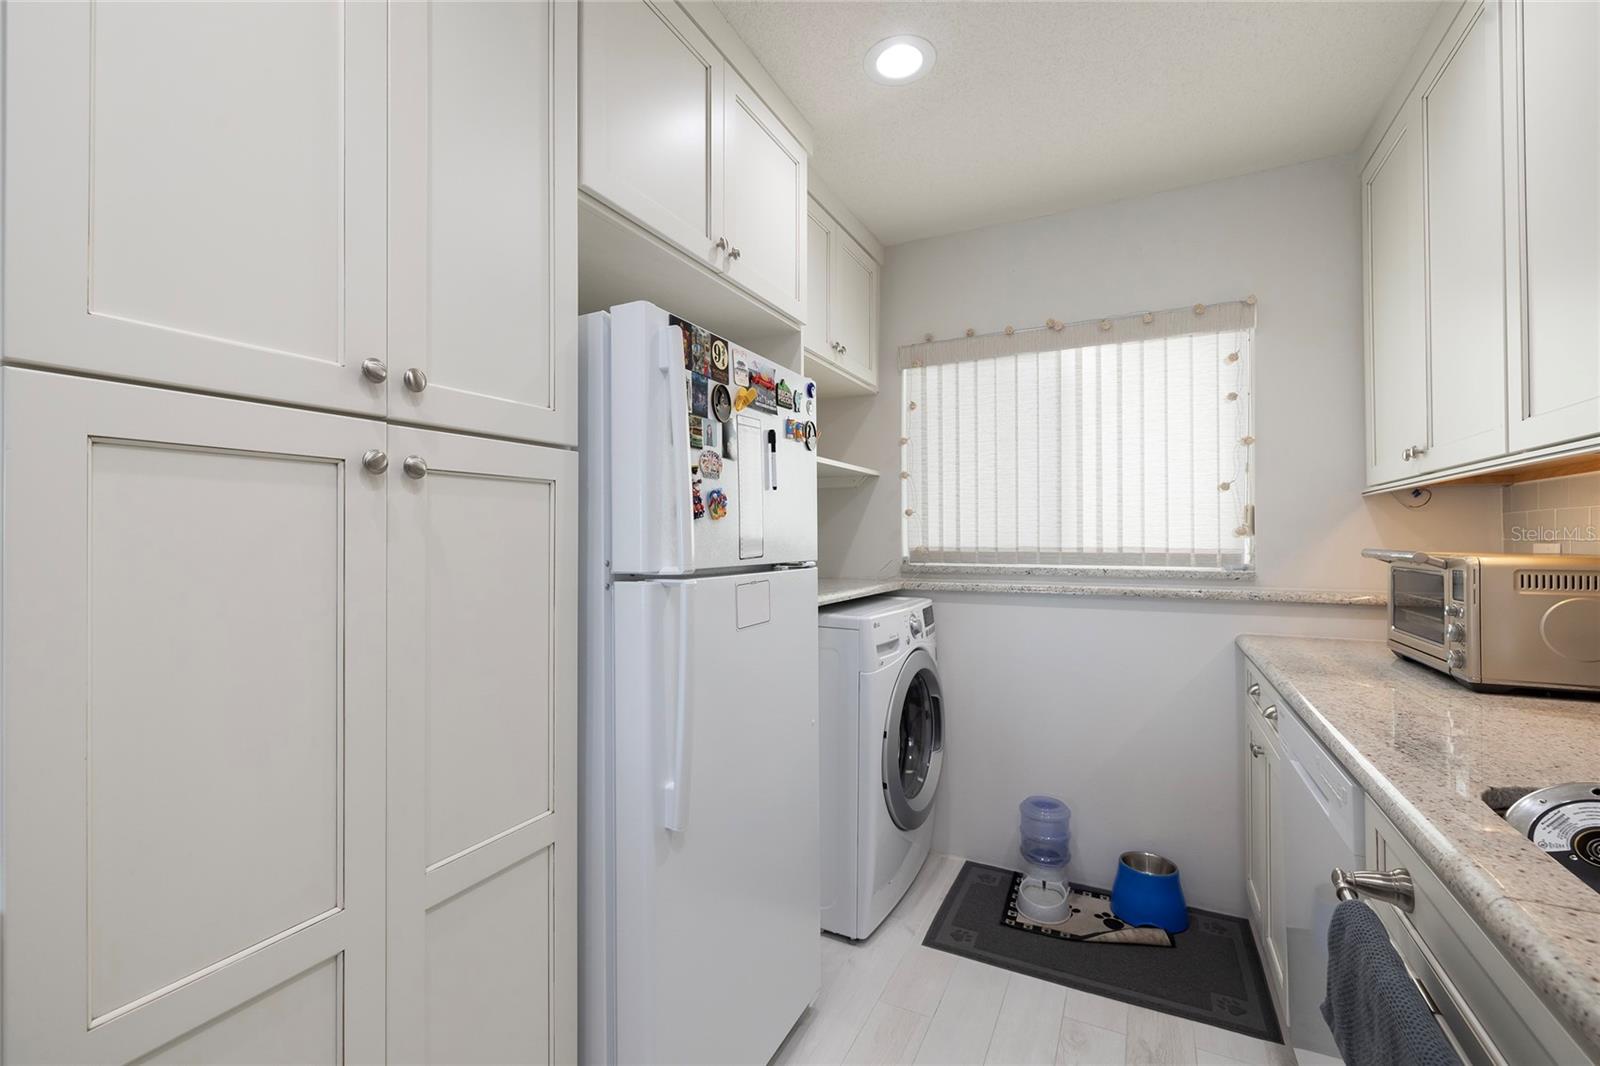 Washer hookup with AMPLE space for stacking a dryer, or swap to a washer/dryer combo!